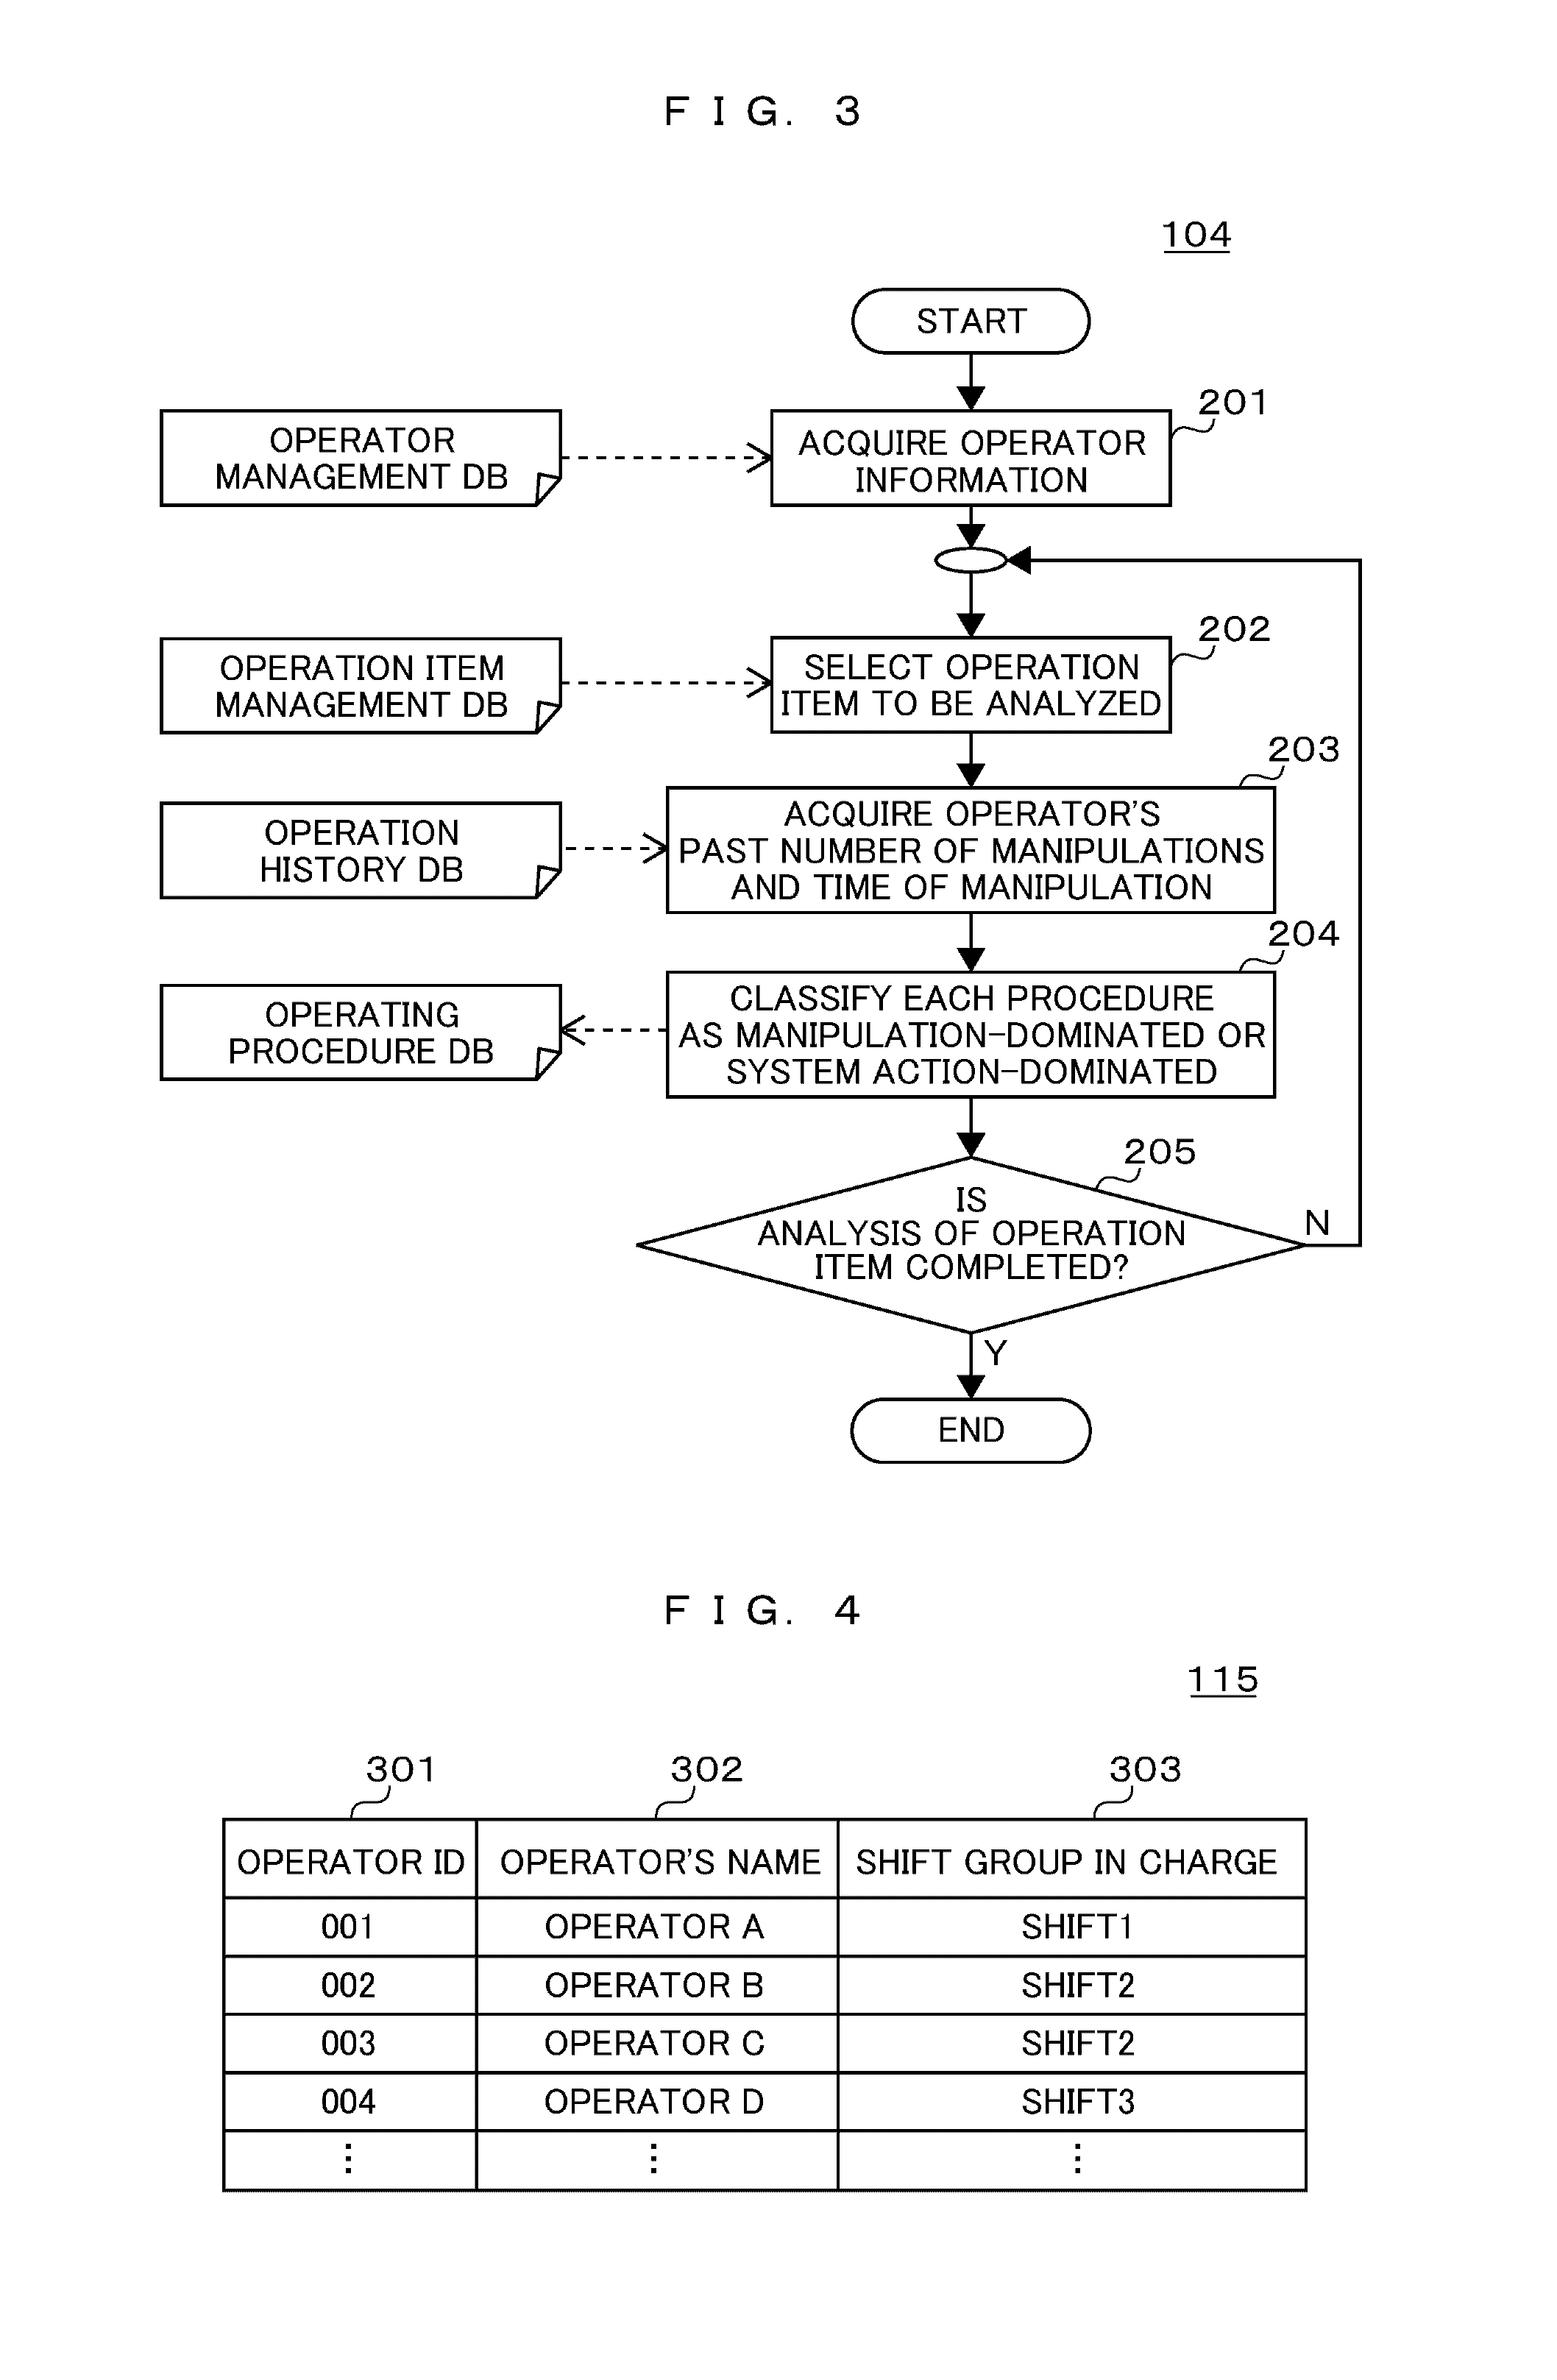 Operating plan formulation support system and method